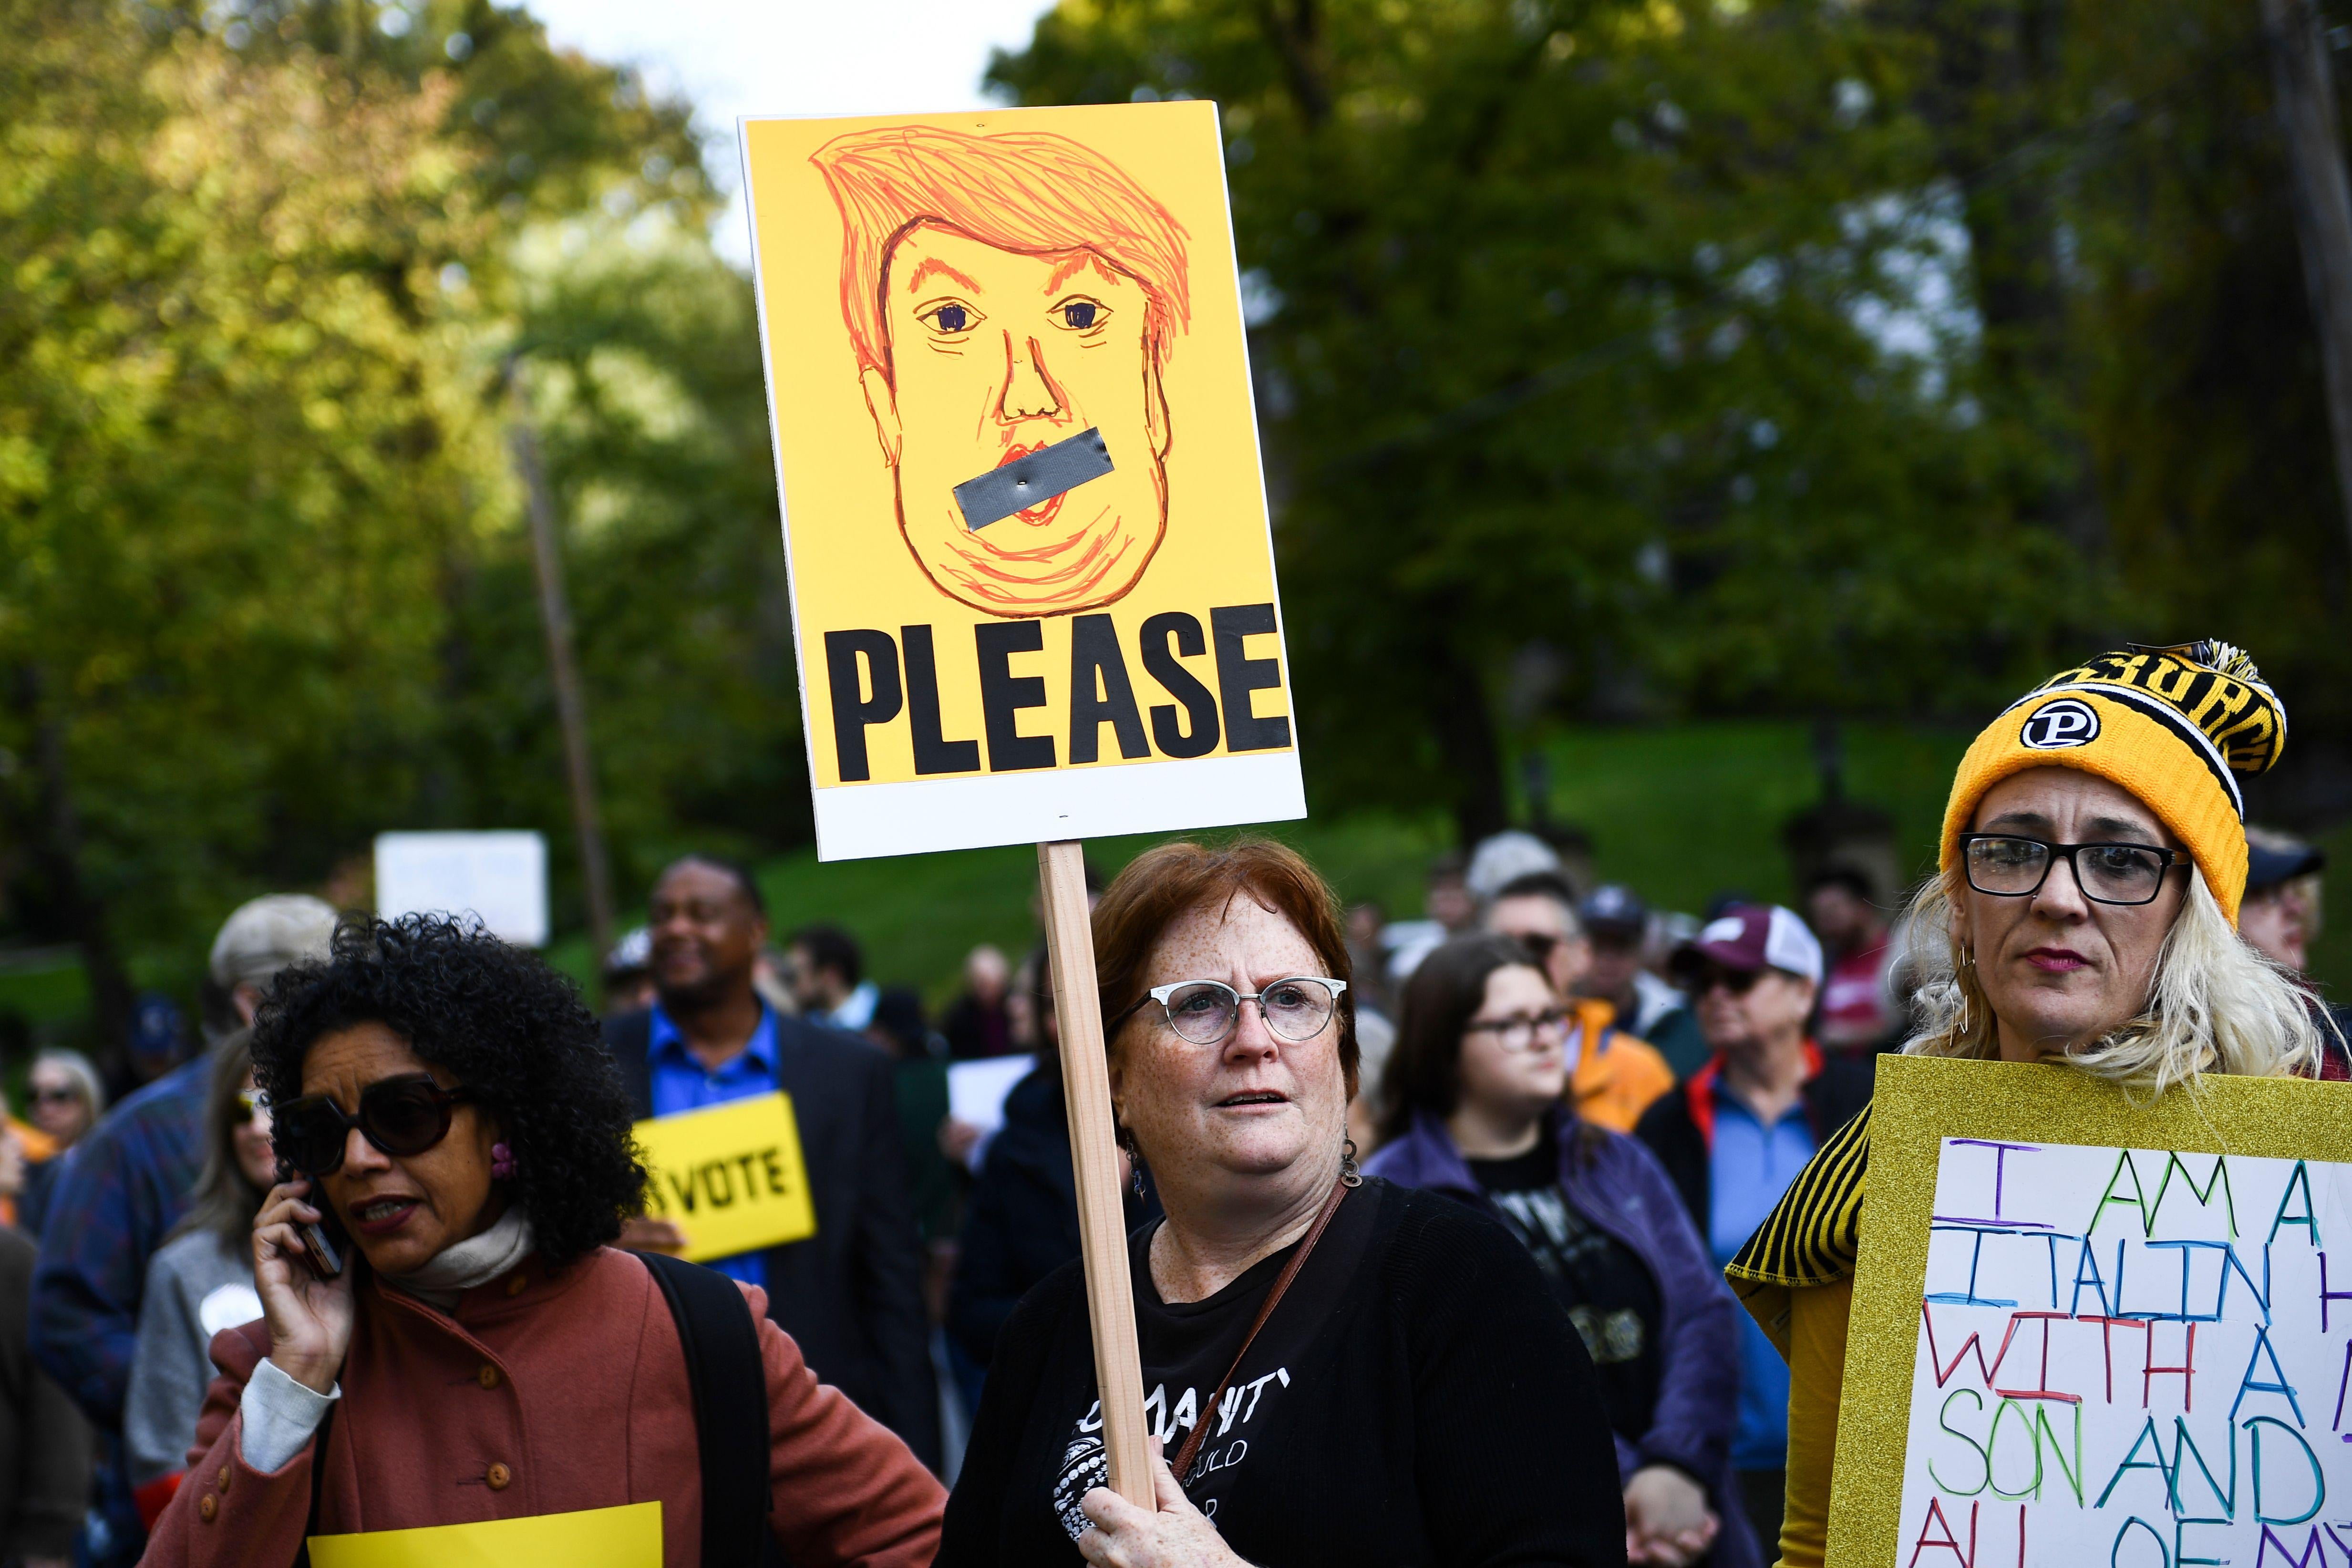 People protesting against US President Donald Trump wait near the Tree of Life Congregation on October 30, 2018 in Pittsburgh, Pennsylvania. - The first two victims of the deadliest anti-Semitic attack in recent US history were laid to rest in Pittsburgh on Tuesday as the grieving city awaits a controversial visit by President Donald Trump and his wife Melania.Trump's visit to the city has been contentious, coming amid a mounting row over whether his fierce rhetoric at campaign rallies and on Twitter has helped stoke extremism ahead of November 6 midterm elections. A protest in Pittsburgh against the president has been called for Tuesday afternoon. (Photo by Brendan Smialowski / AFP)        (Photo credit should read BRENDAN SMIALOWSKI/AFP/Getty Images)